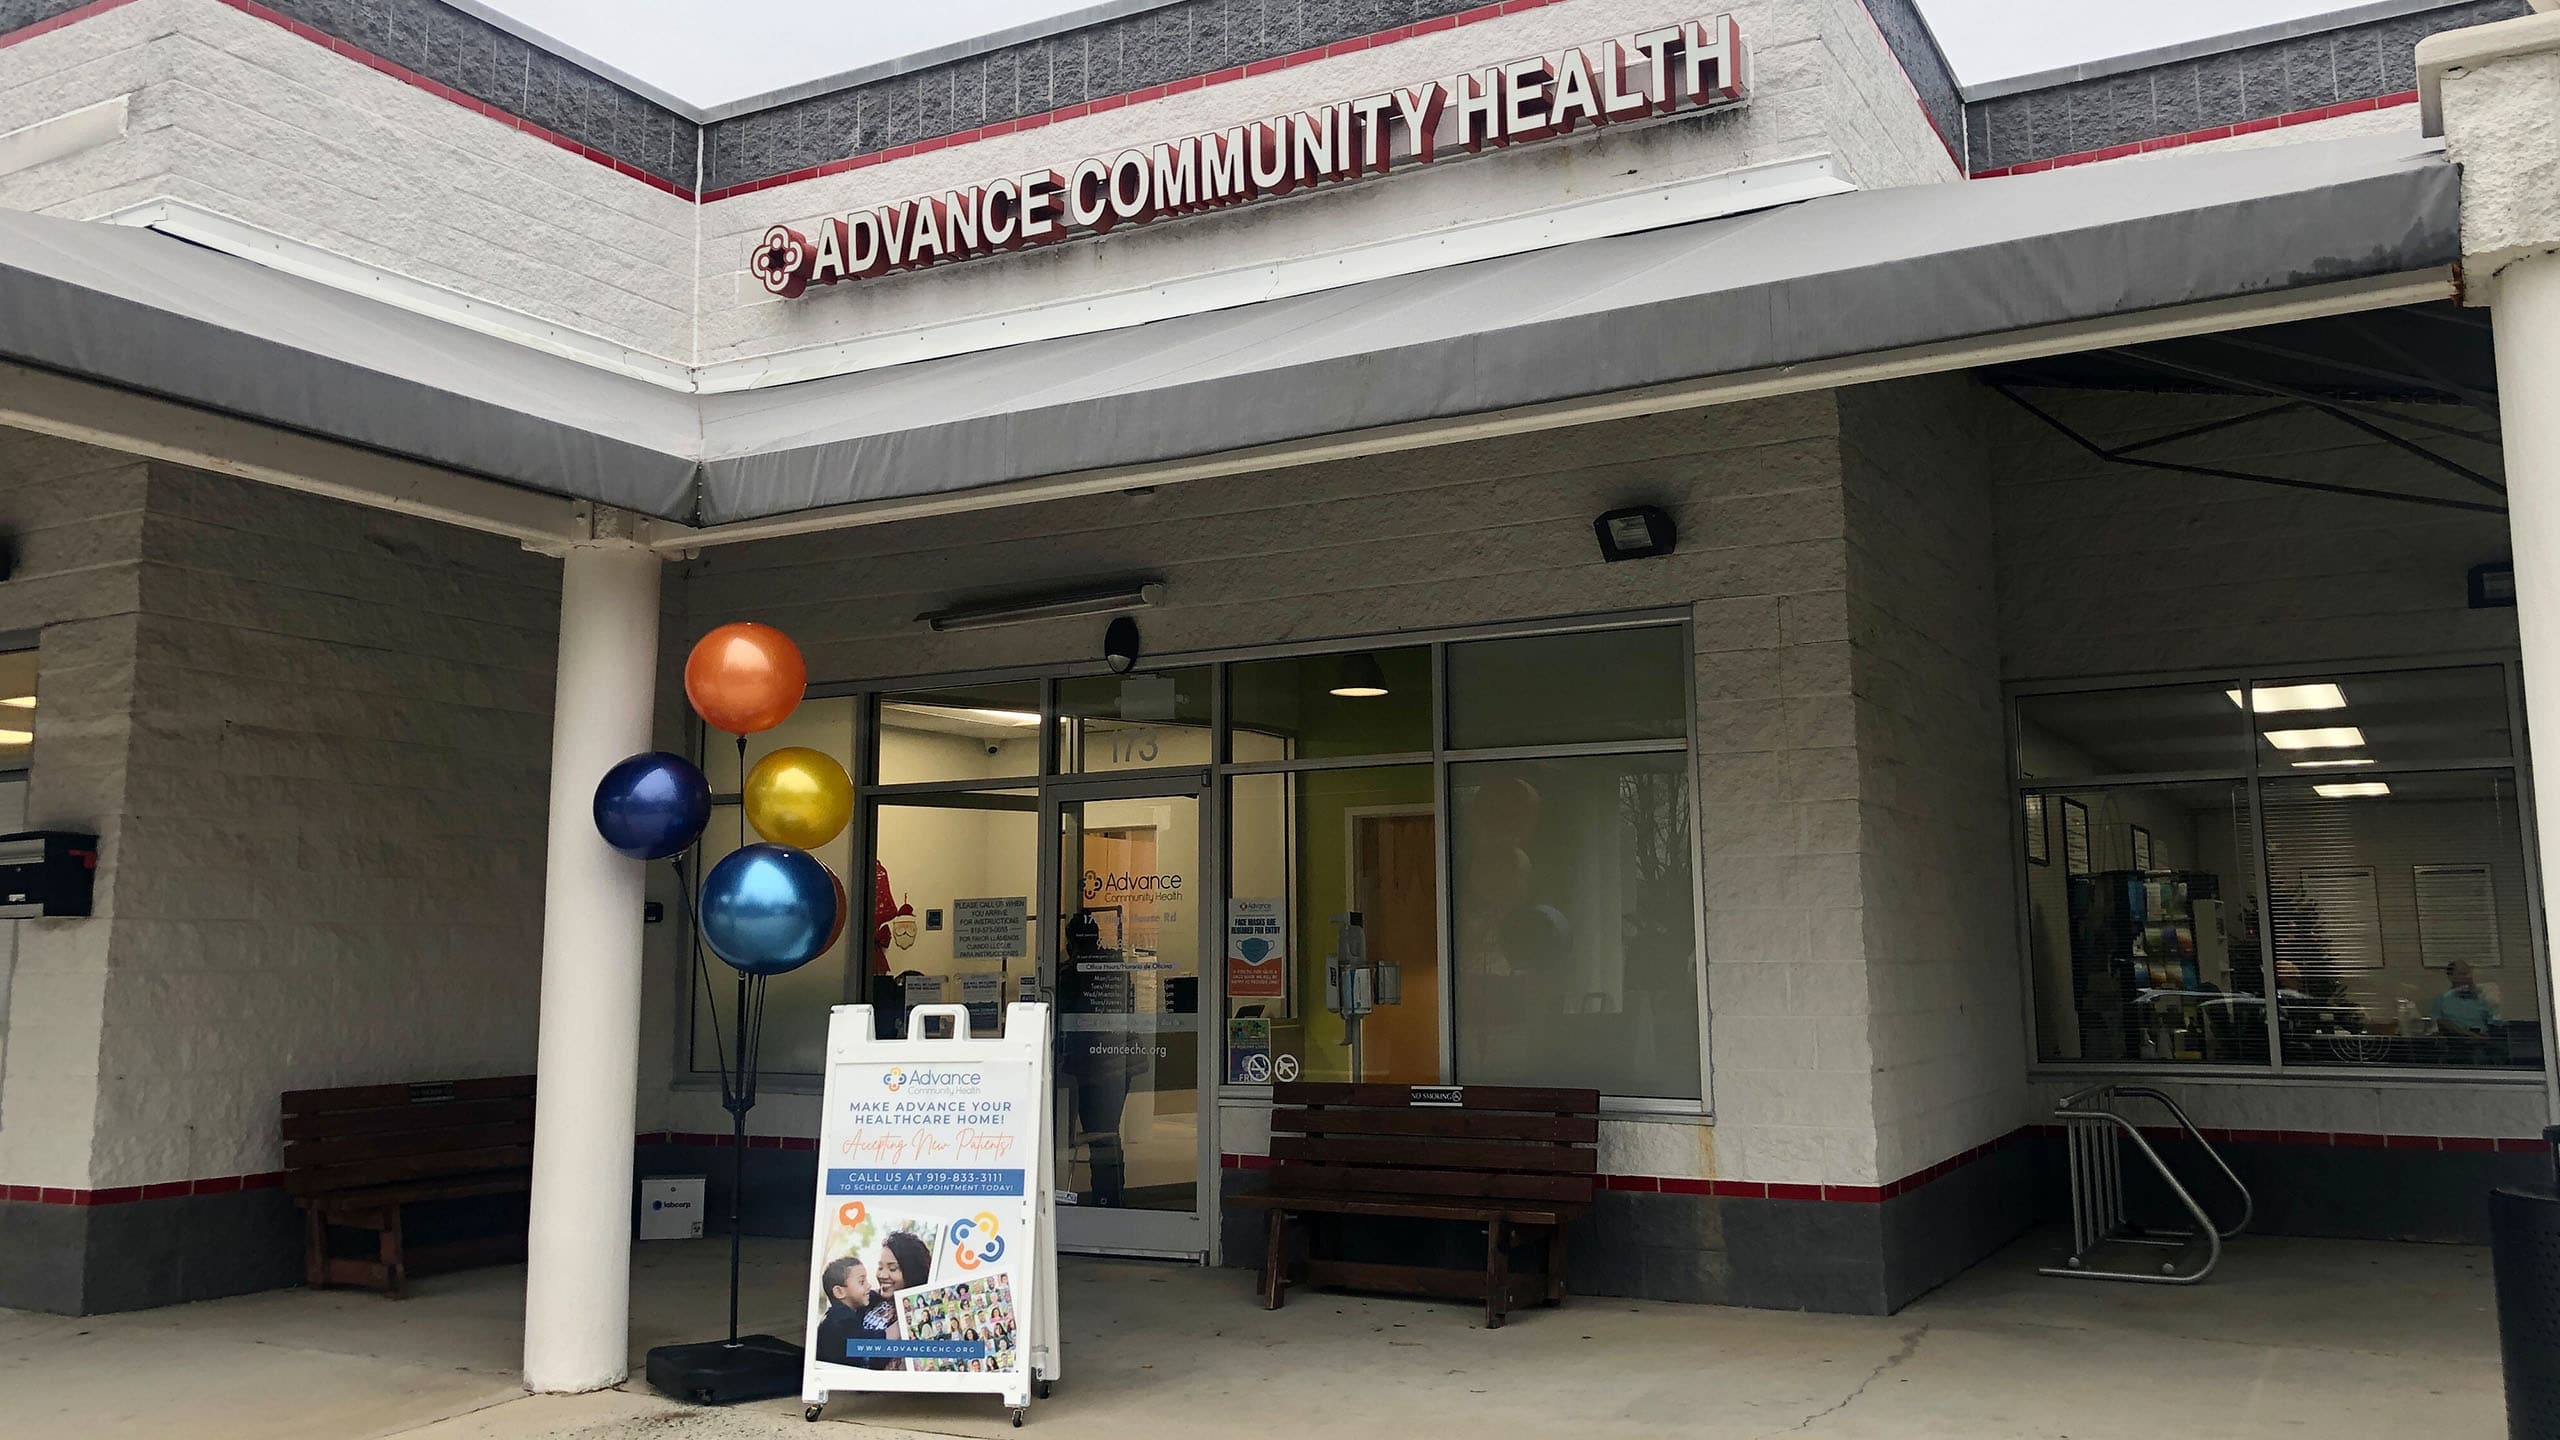 Advance Community Health Cary building and plaza